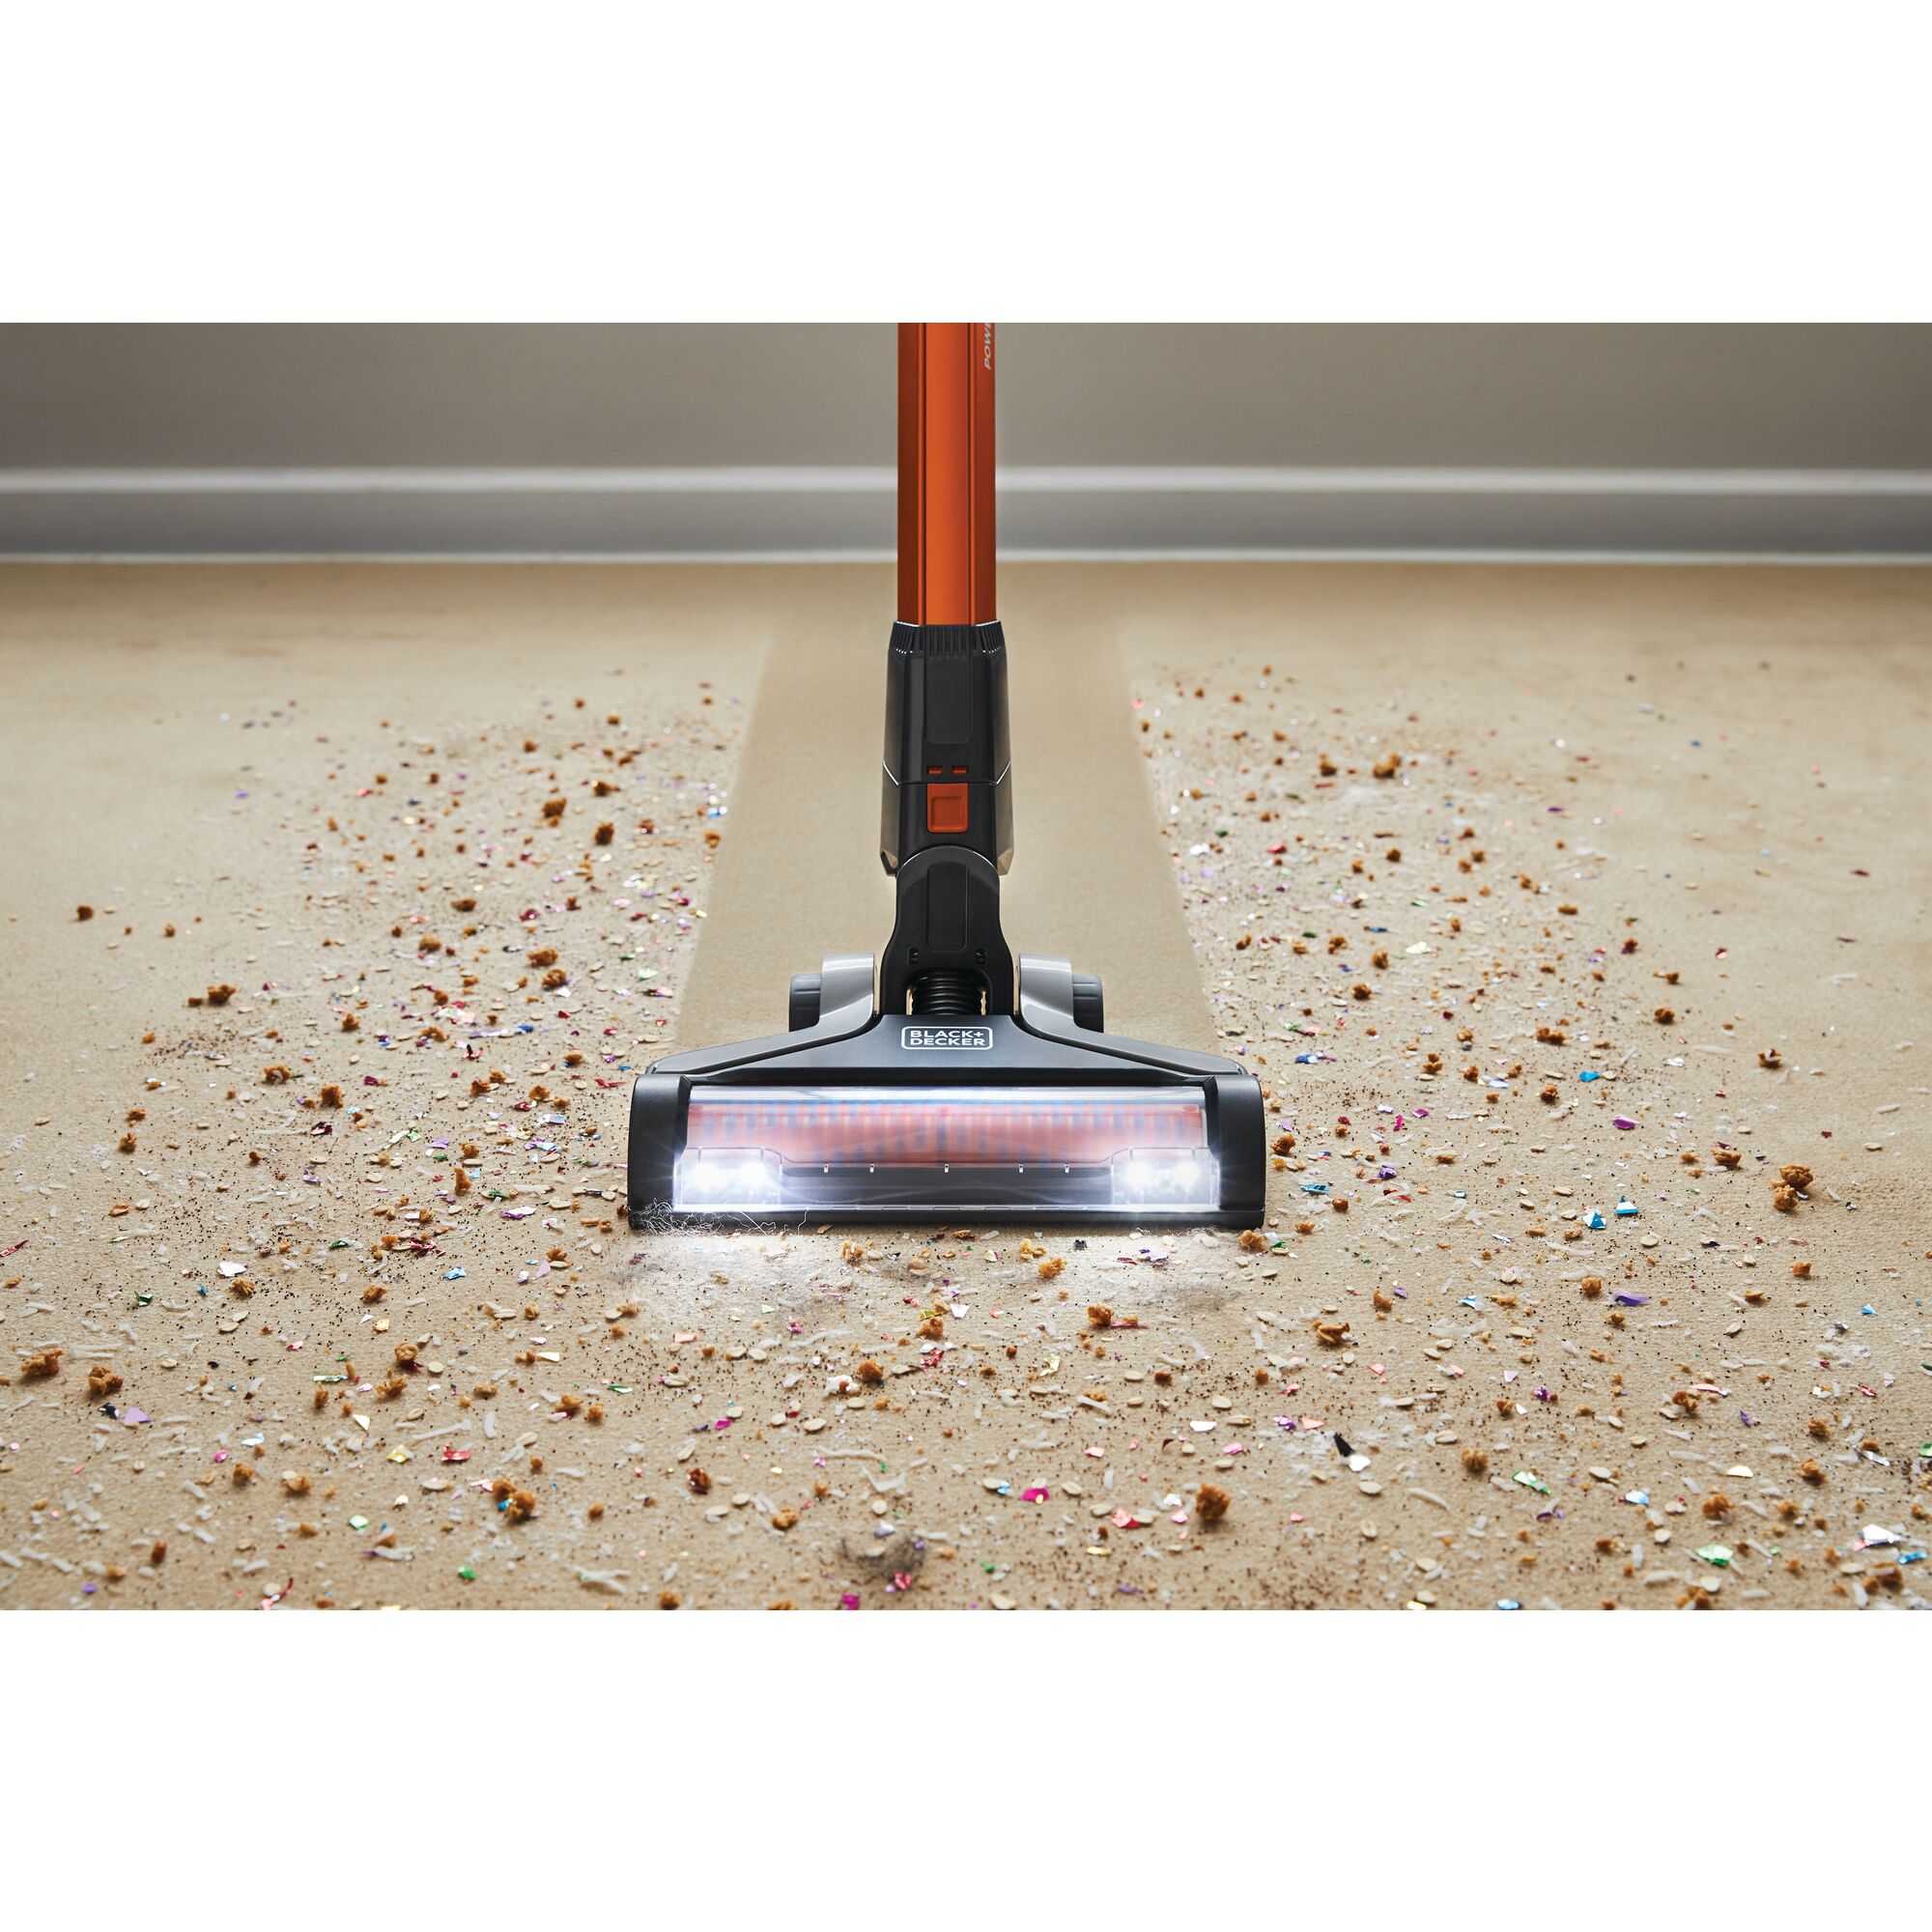 POWERSERIES Extreme Cordless Stick Vacuum Cleaner being used to clean food mess from carpet.